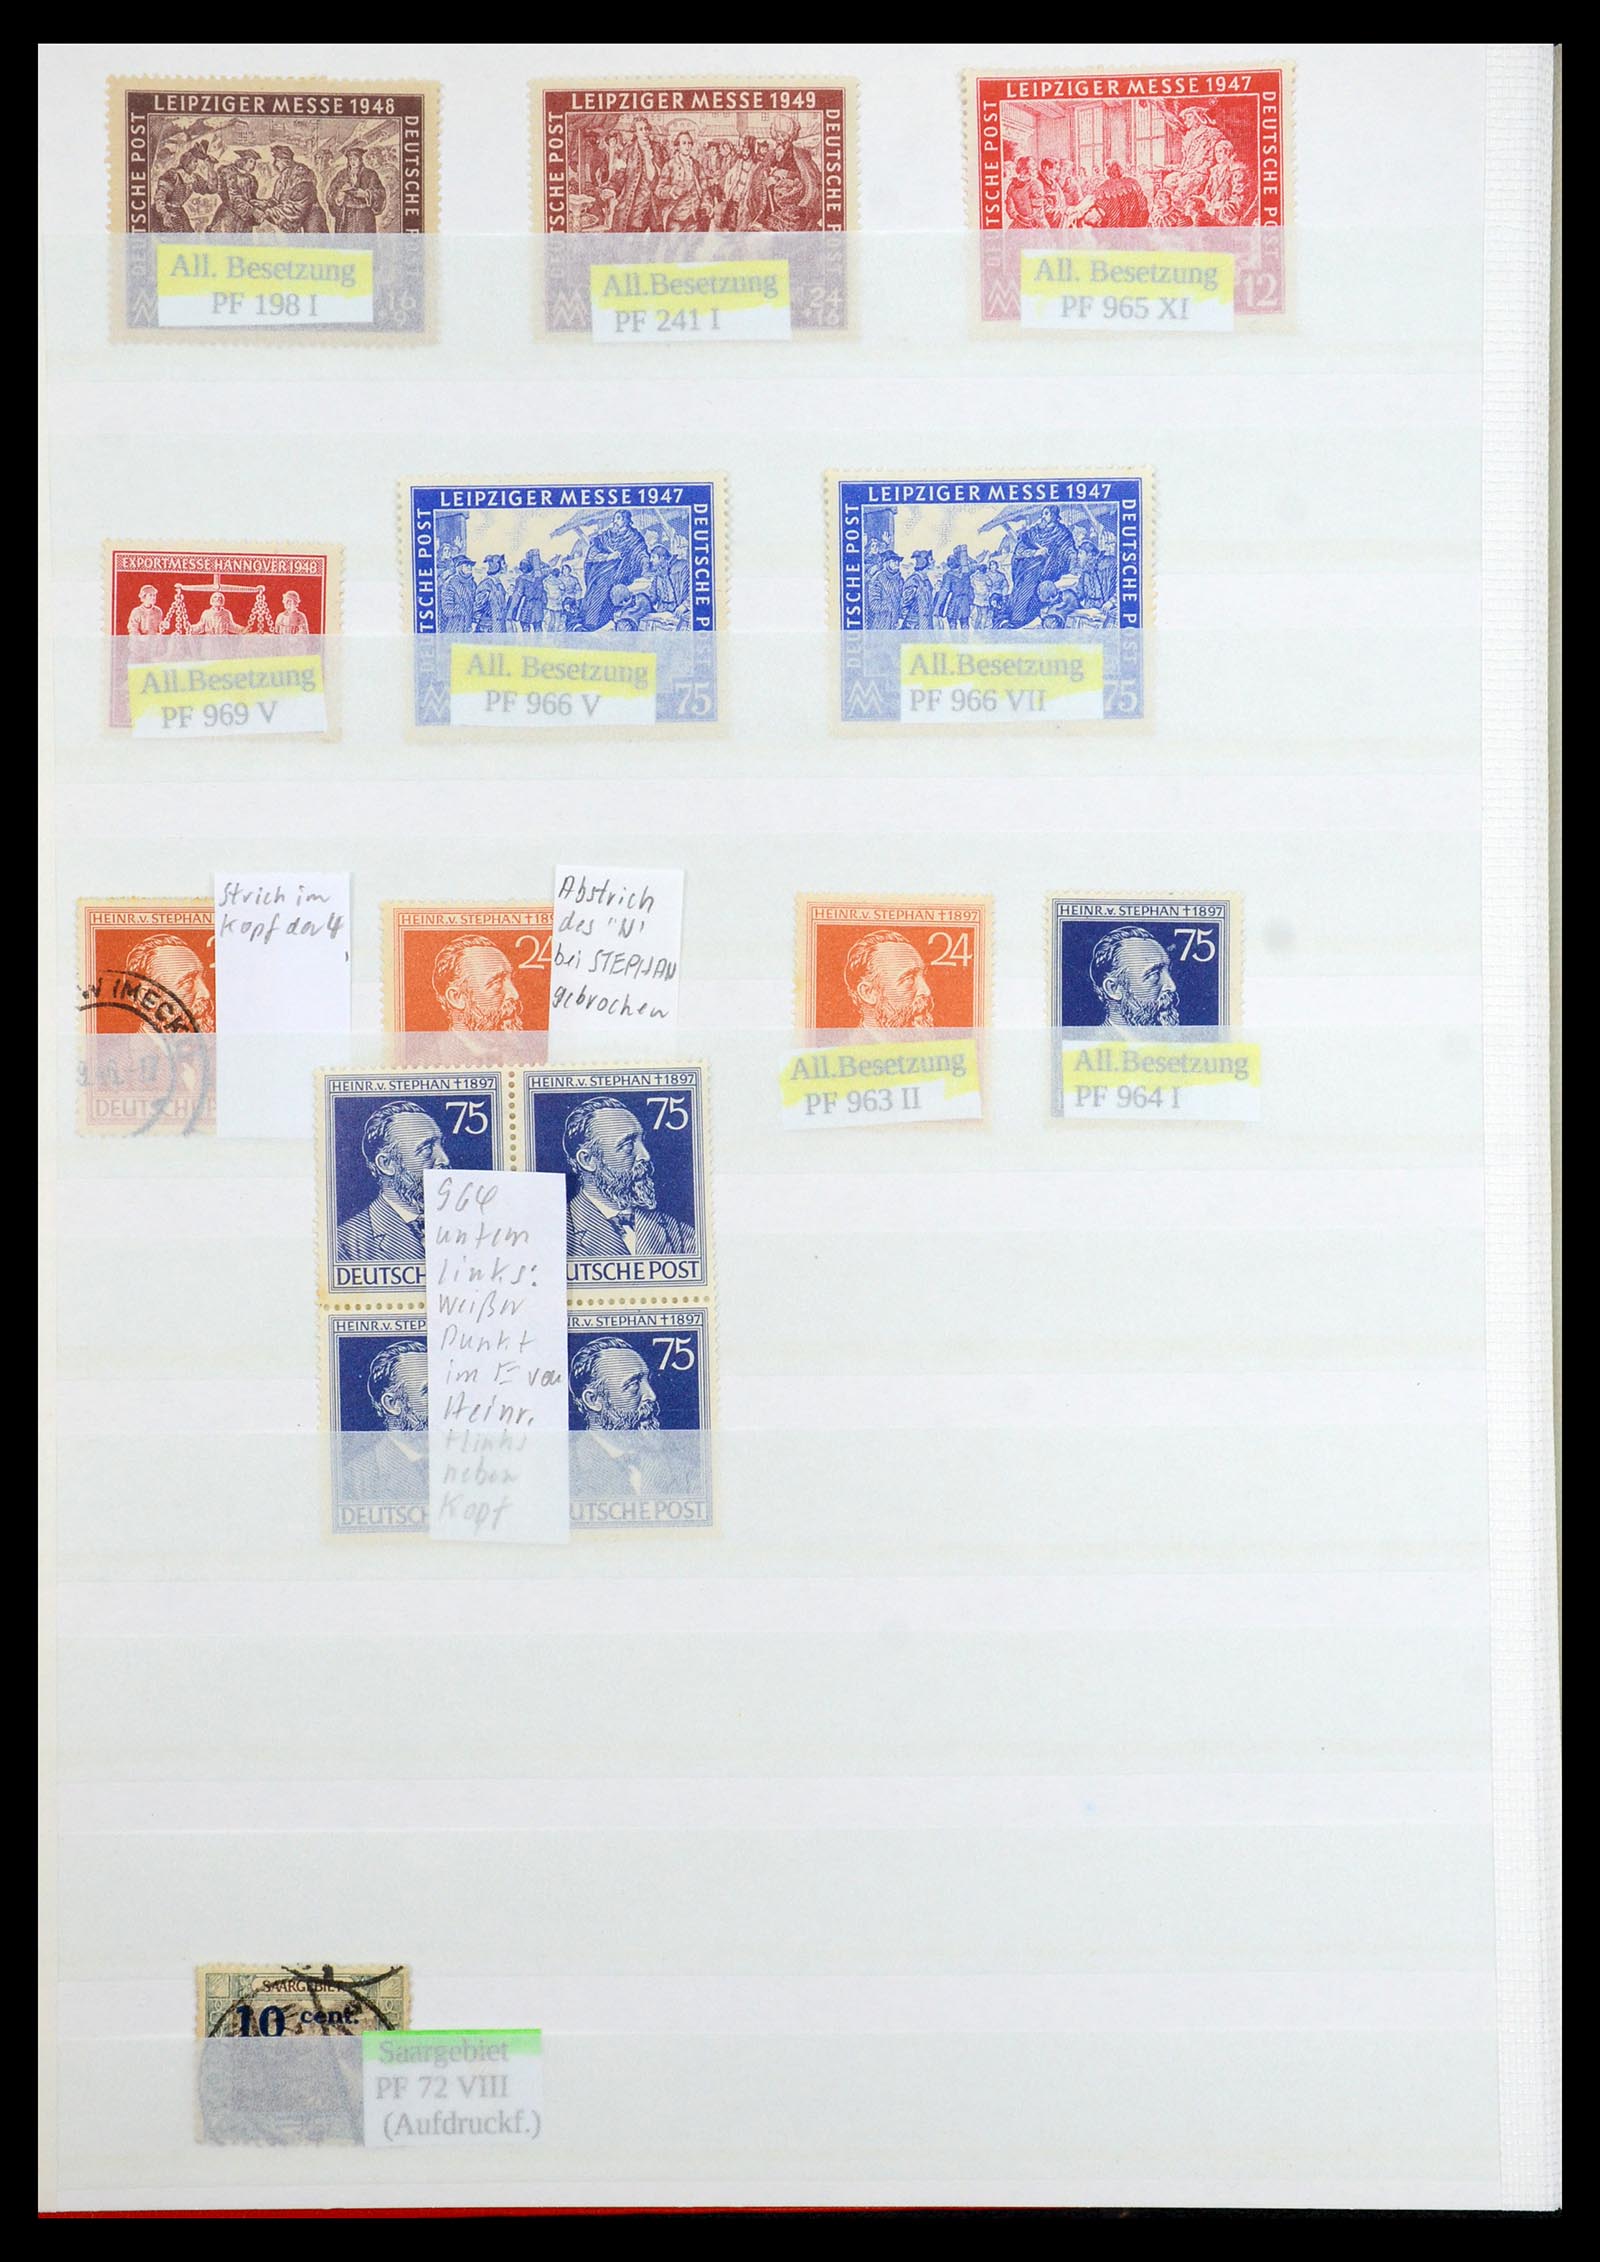 35339 025 - Stamp Collection 35339 Germany plateflaws and varieties 1872-2000.